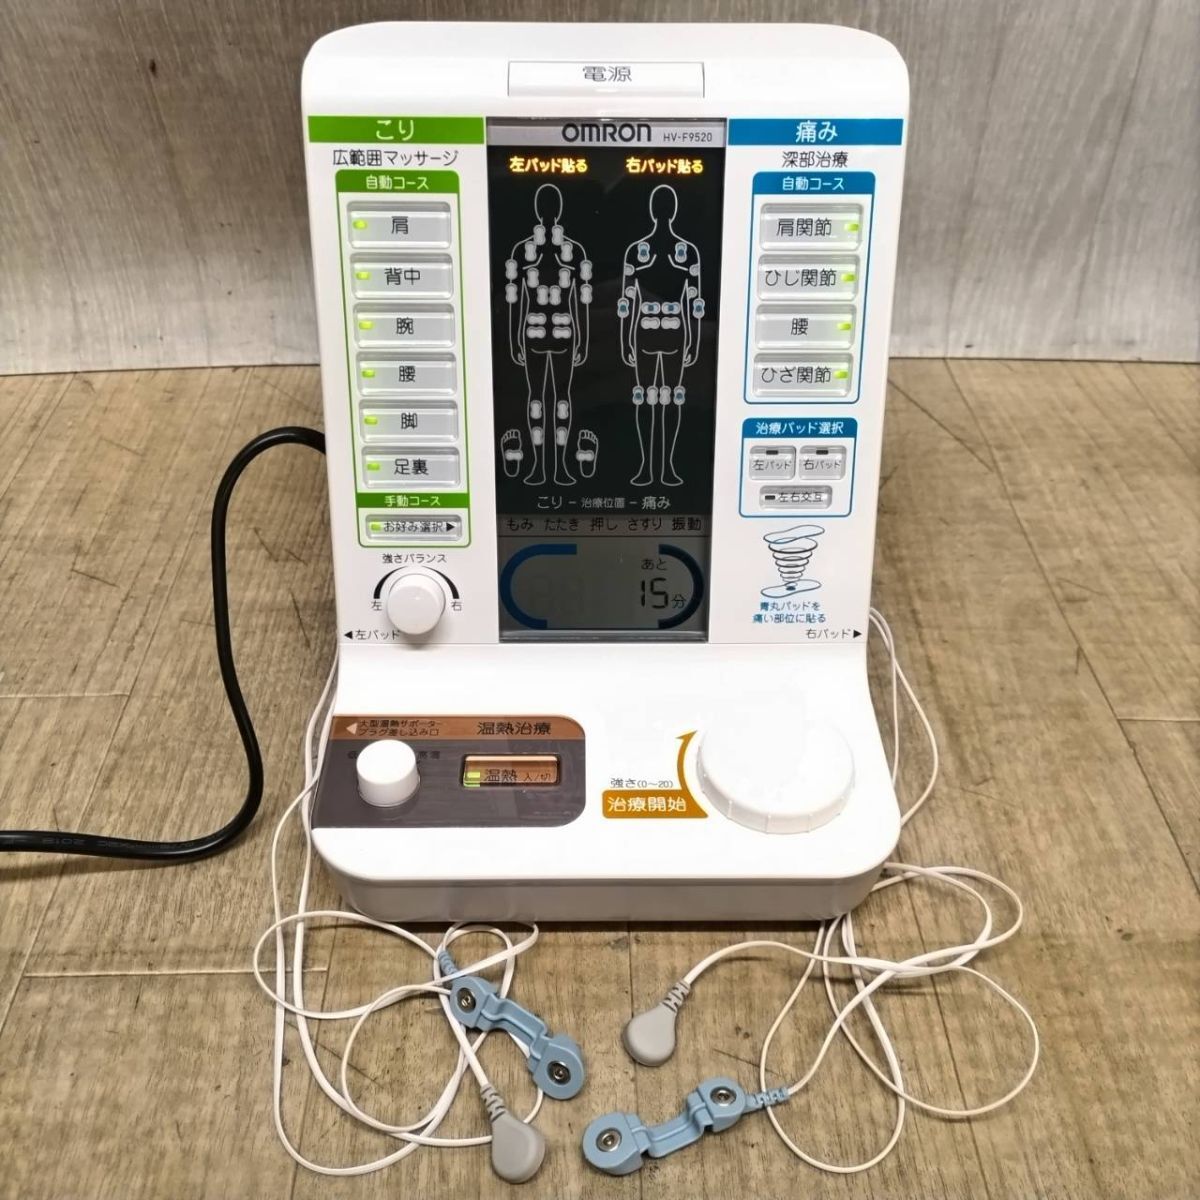 F637-U13-2308 OMRON Omron electric therapeutics device HV-F9520 low cycle temperature . combining therapeutics device for exchange pad, pocket IN action amount total attaching electrification has confirmed ⑥